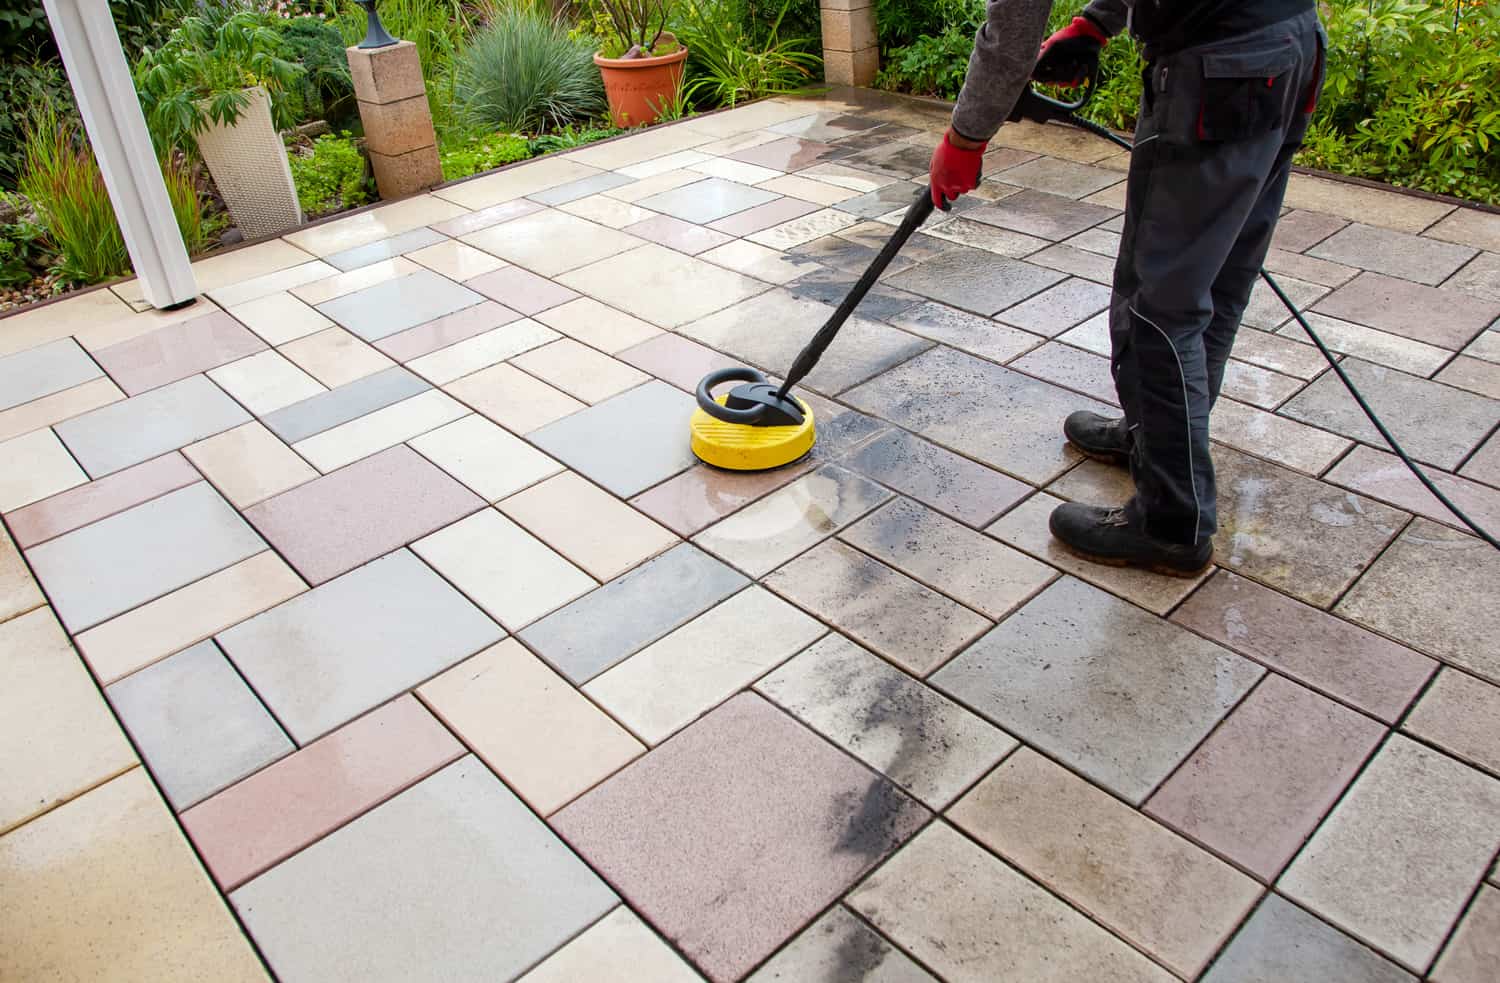 Cleaning stone slabs on patio with the high-pressure cleaner.